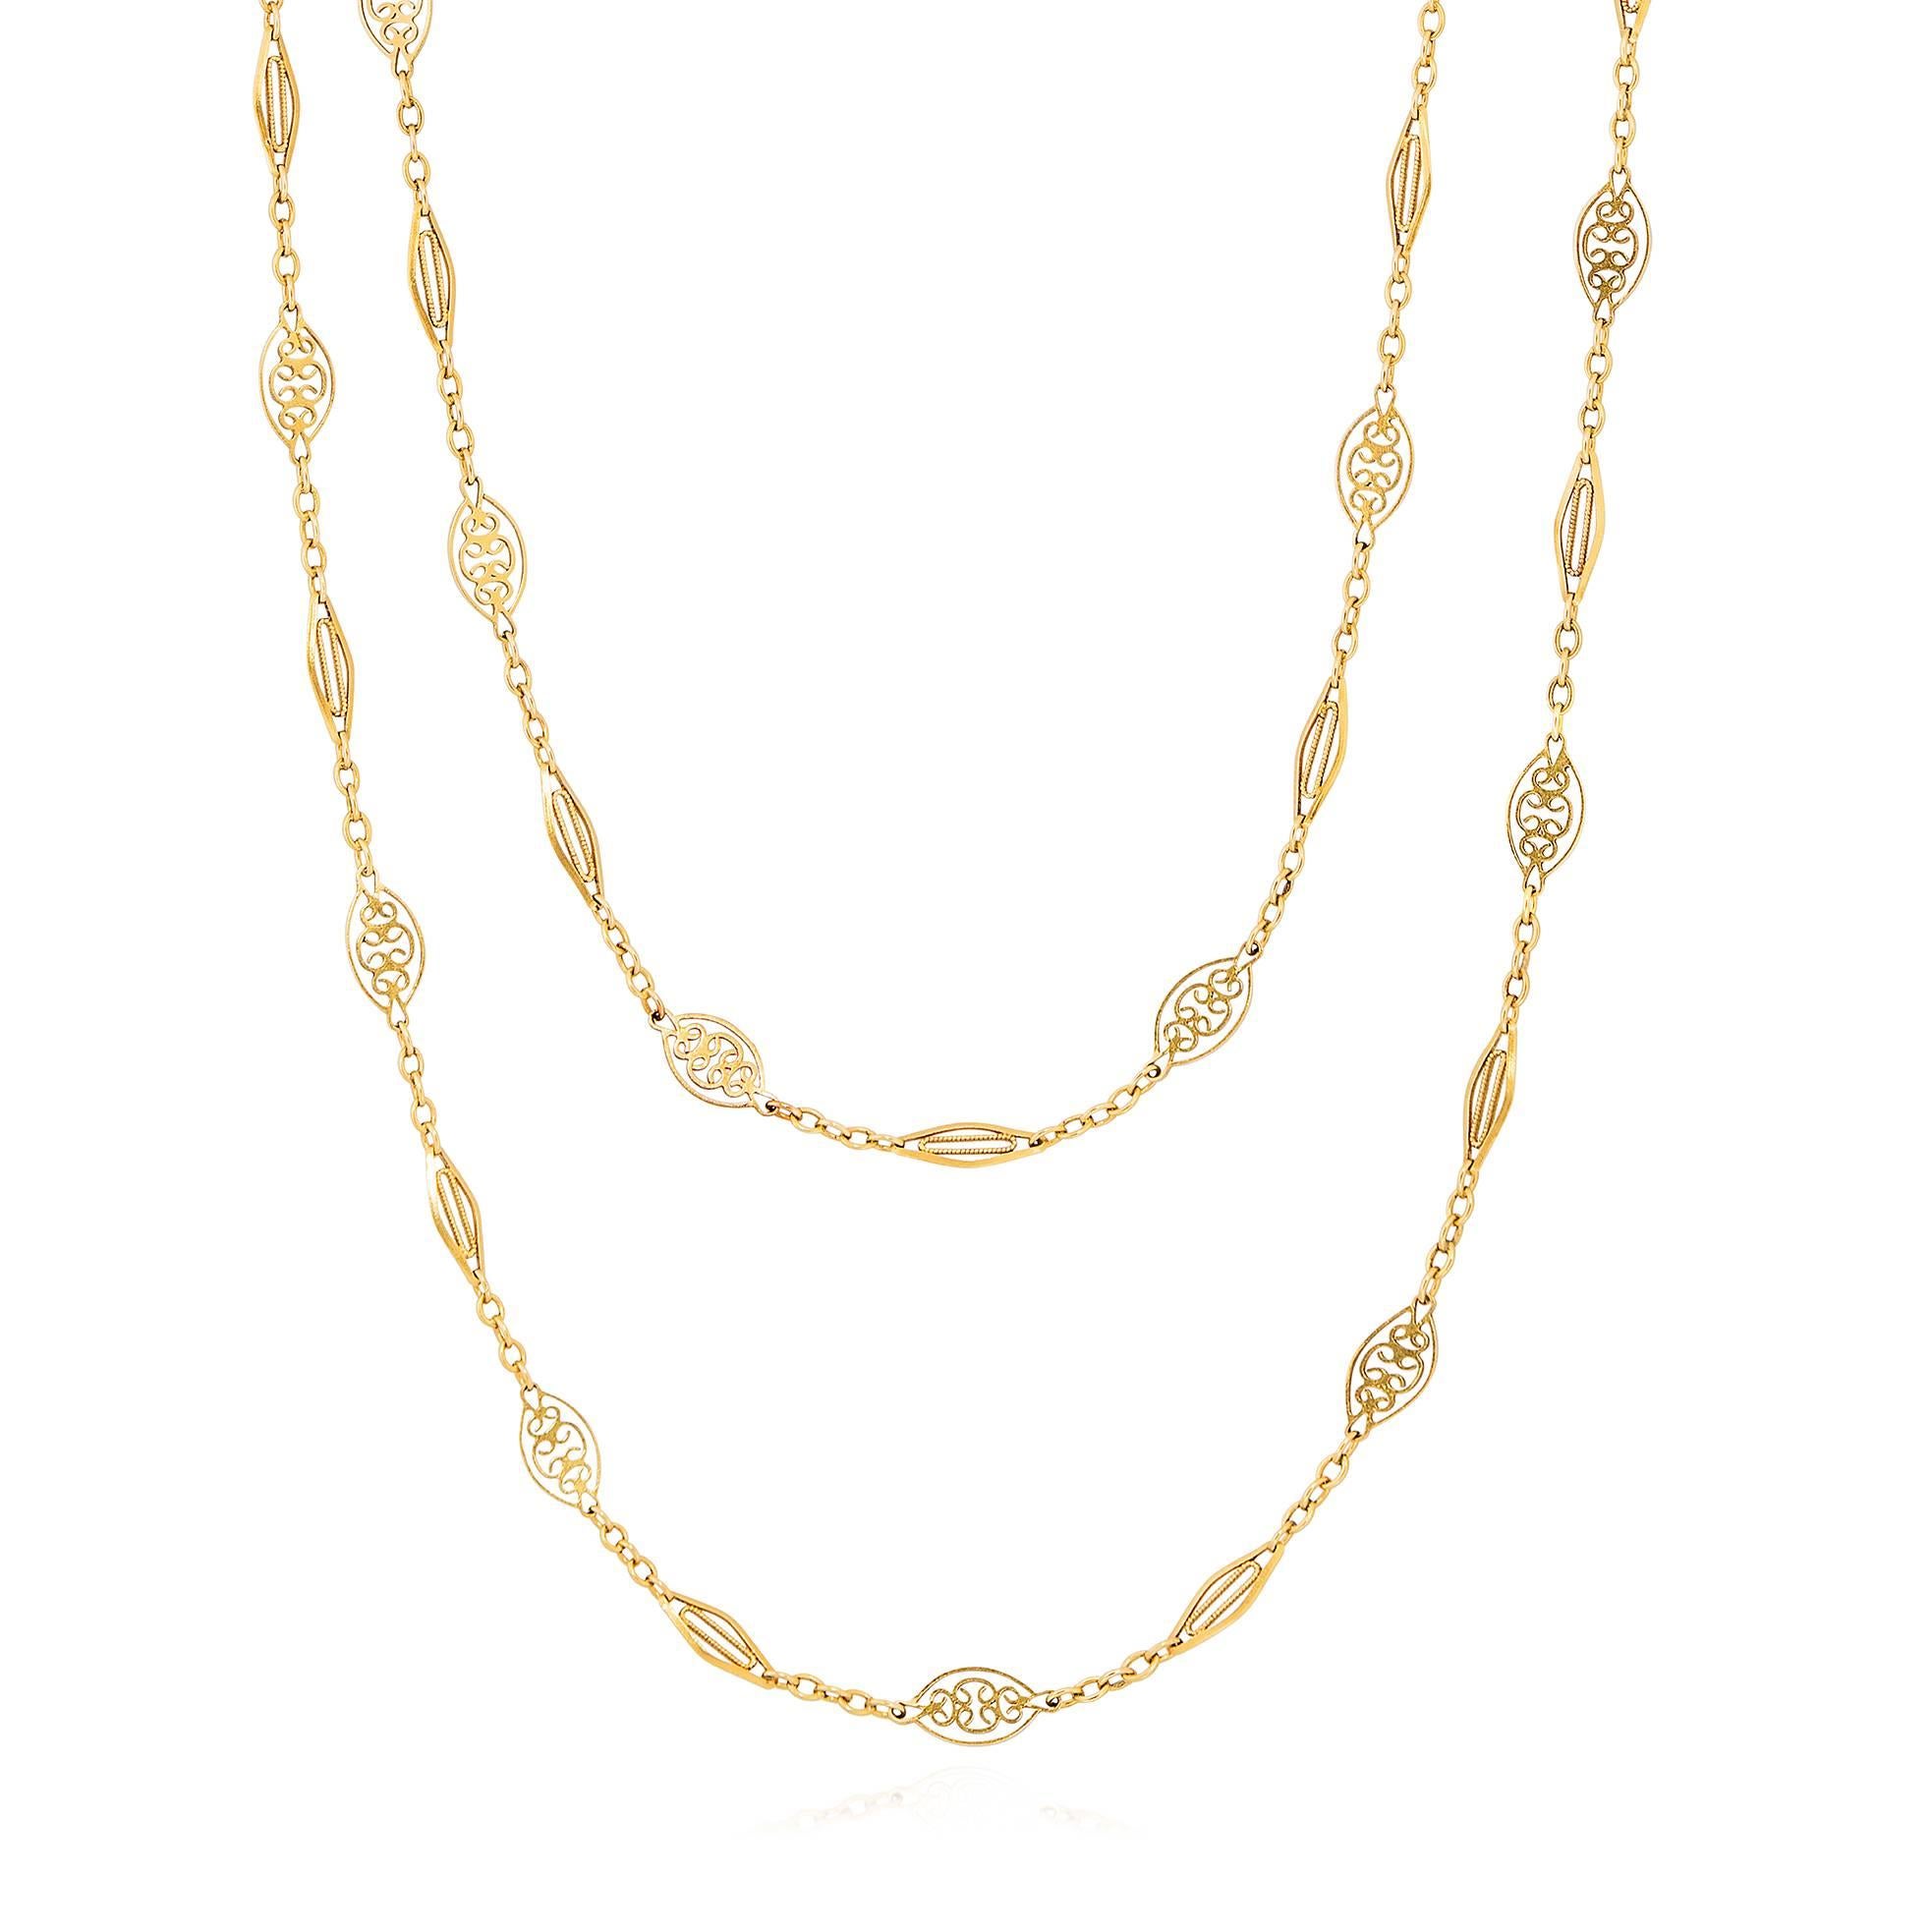 1900s Antique French Gold Chain Necklace